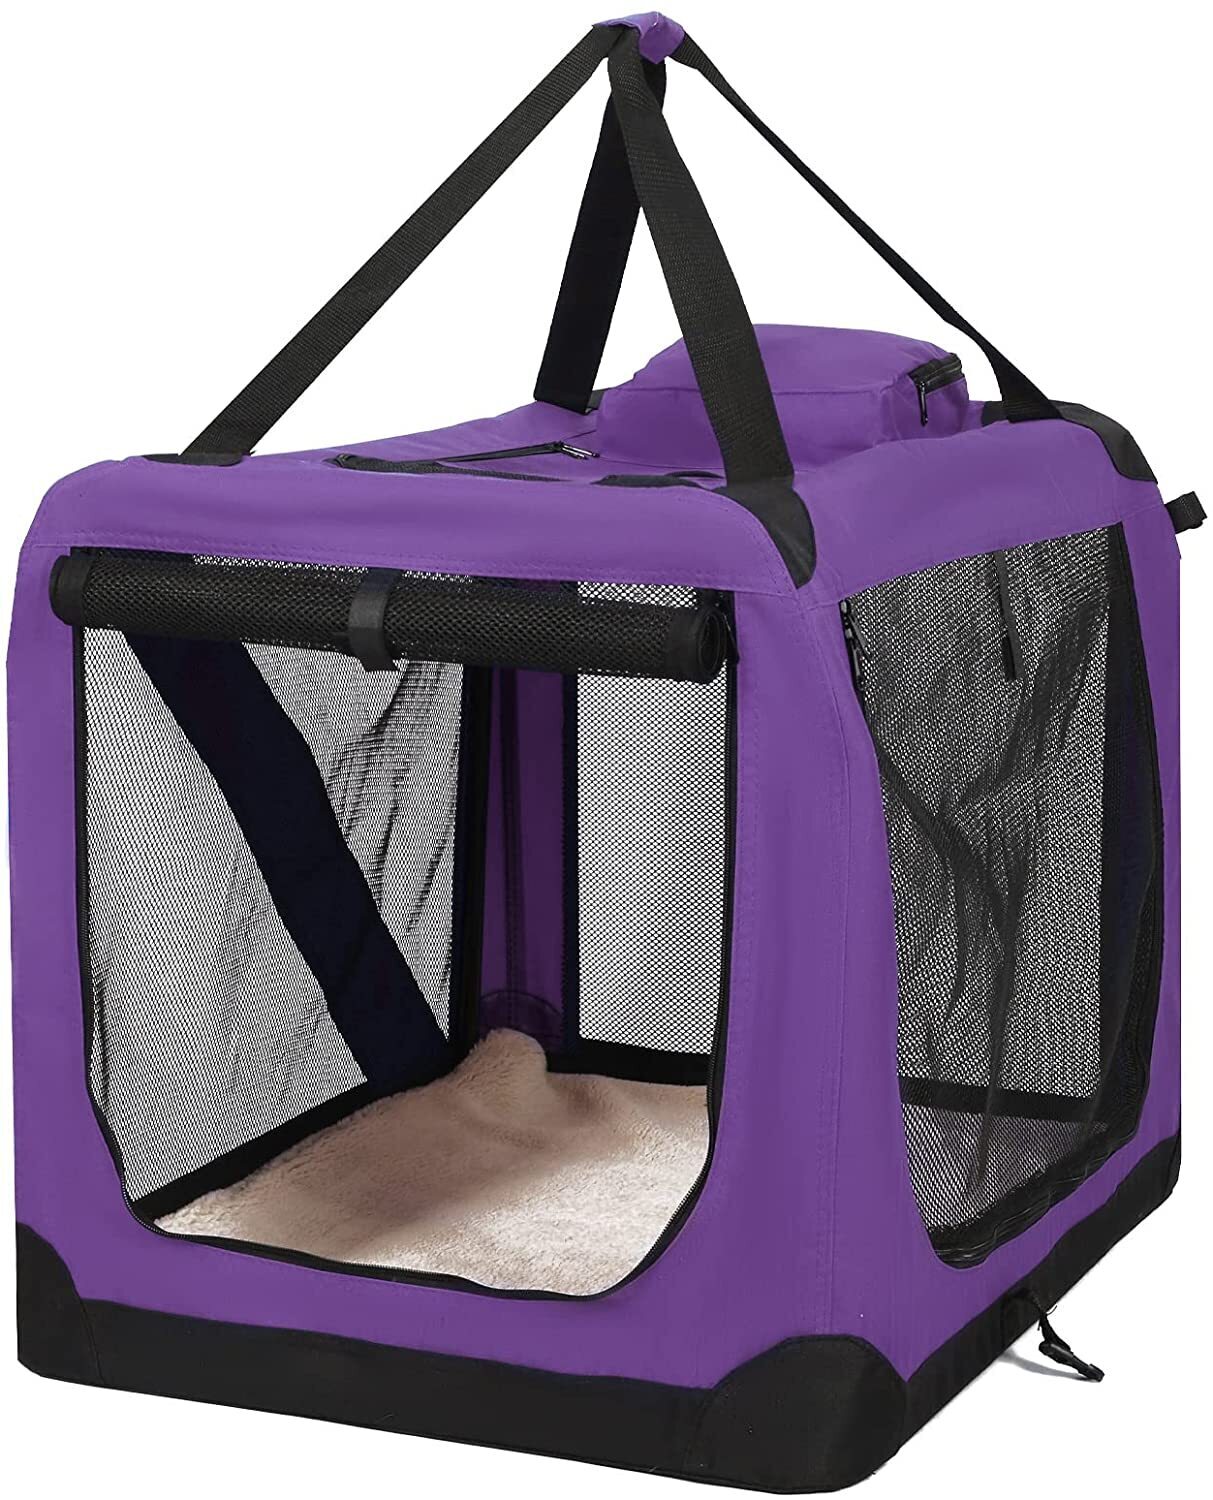 Large dog crate with portable features